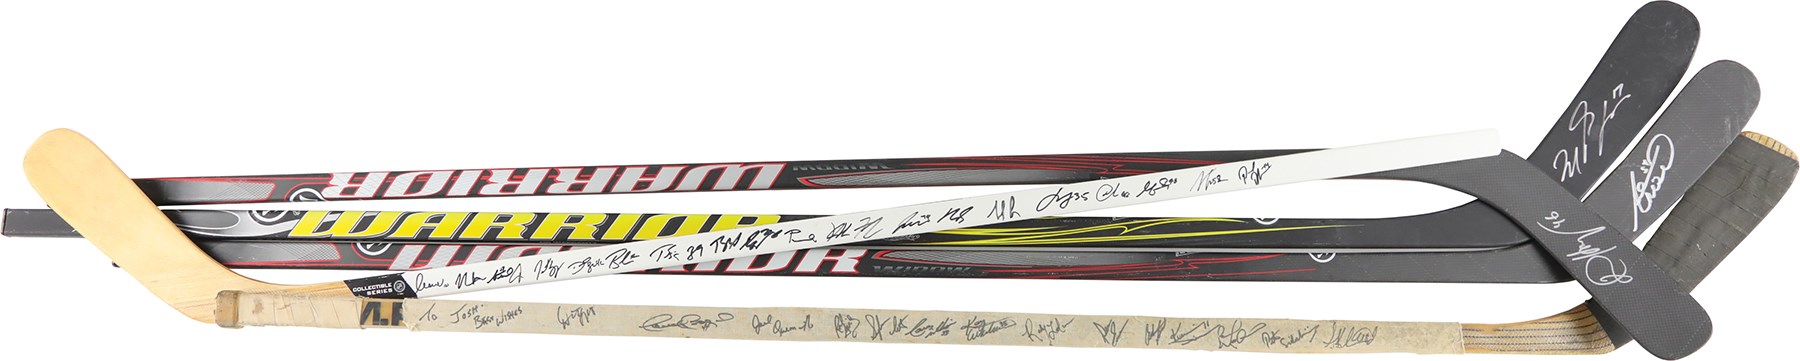 Hockey - Signed Hockey Stick Collection w/Bruins & Whalers (5)